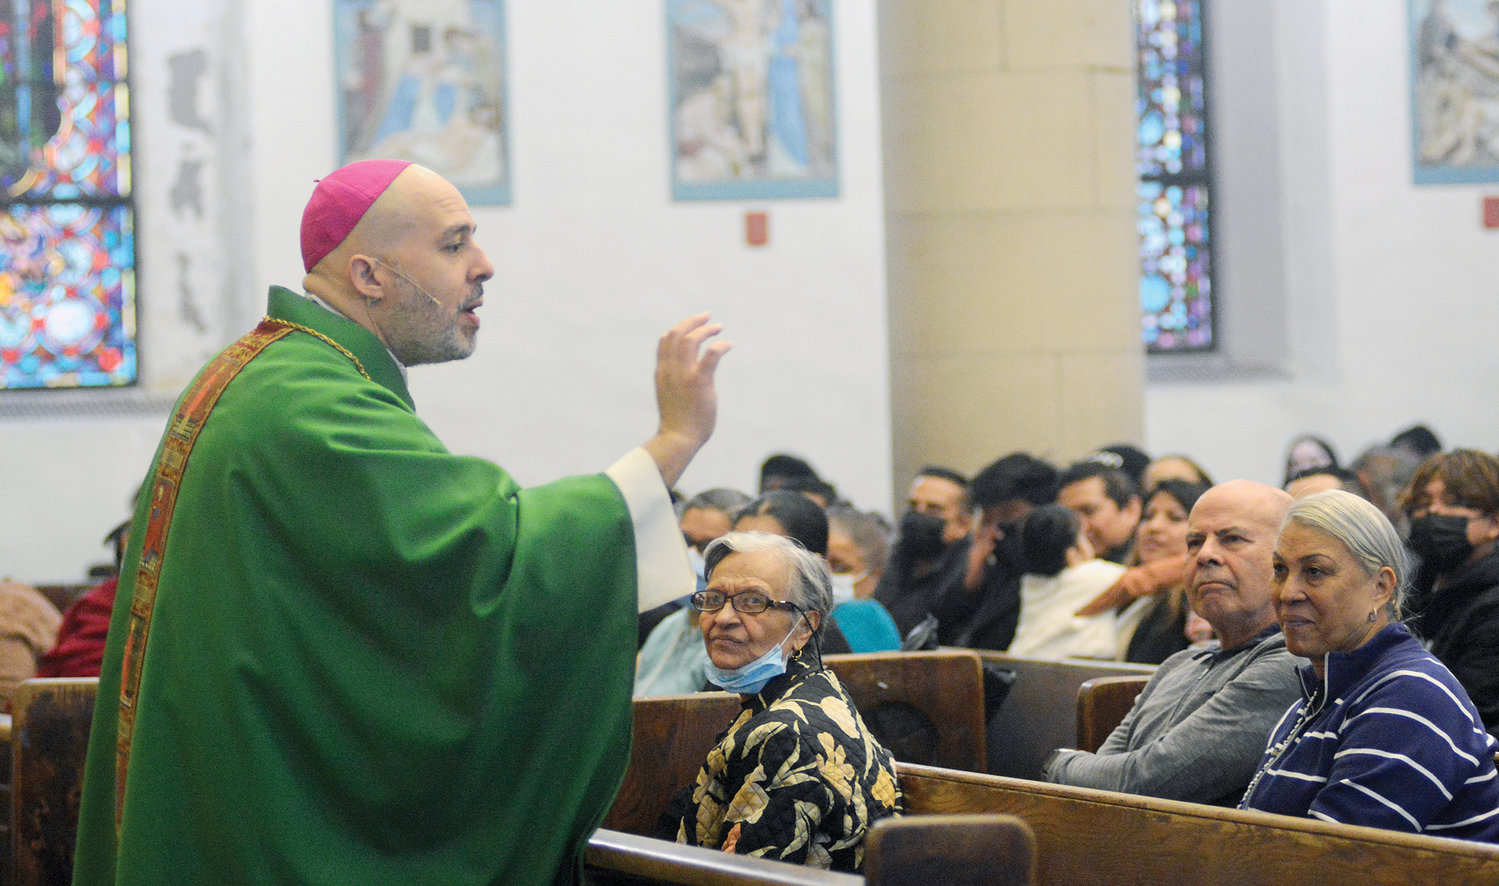 With his parents Jose and Mercedes Espaillat sitting in a front pew, then-Bishop-elect Joseph A. Espaillat delivers his homily during a Feb. 13 Mass he celebrated at St. Anthony of Padua Church in the Bronx, where he has been pastor since 2015.